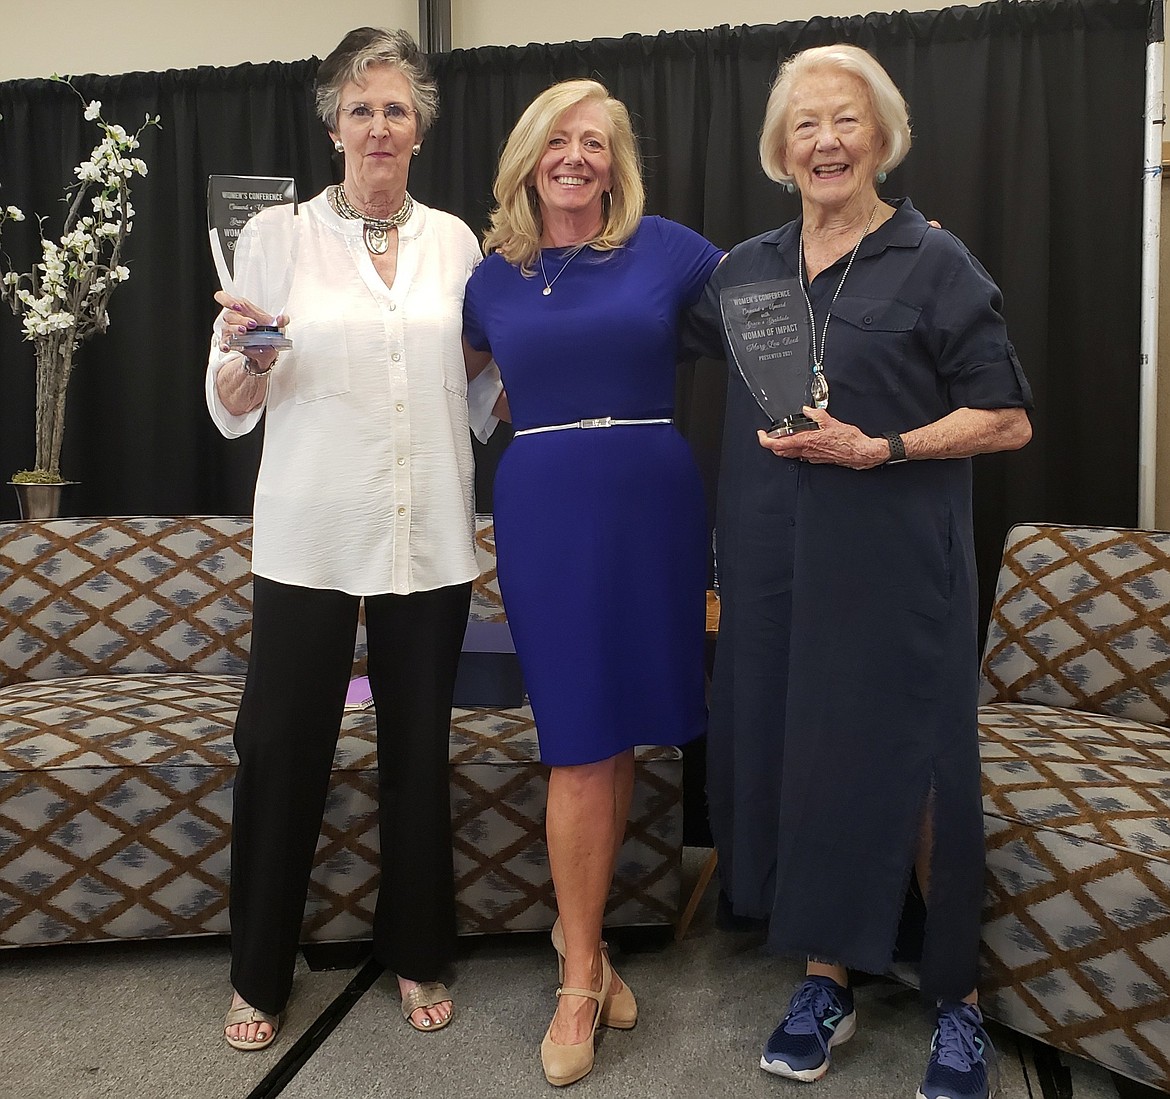 Former Coeur d'Alene Mayor Sandi Bloem, left, North Idaho Alliance CEO Marilee Wallace, middle, and past state legislator Mary Lou Reed stand with the Women of Impact award presented at Friday's women's conference. Photo courtesy Kerri Thoreson.